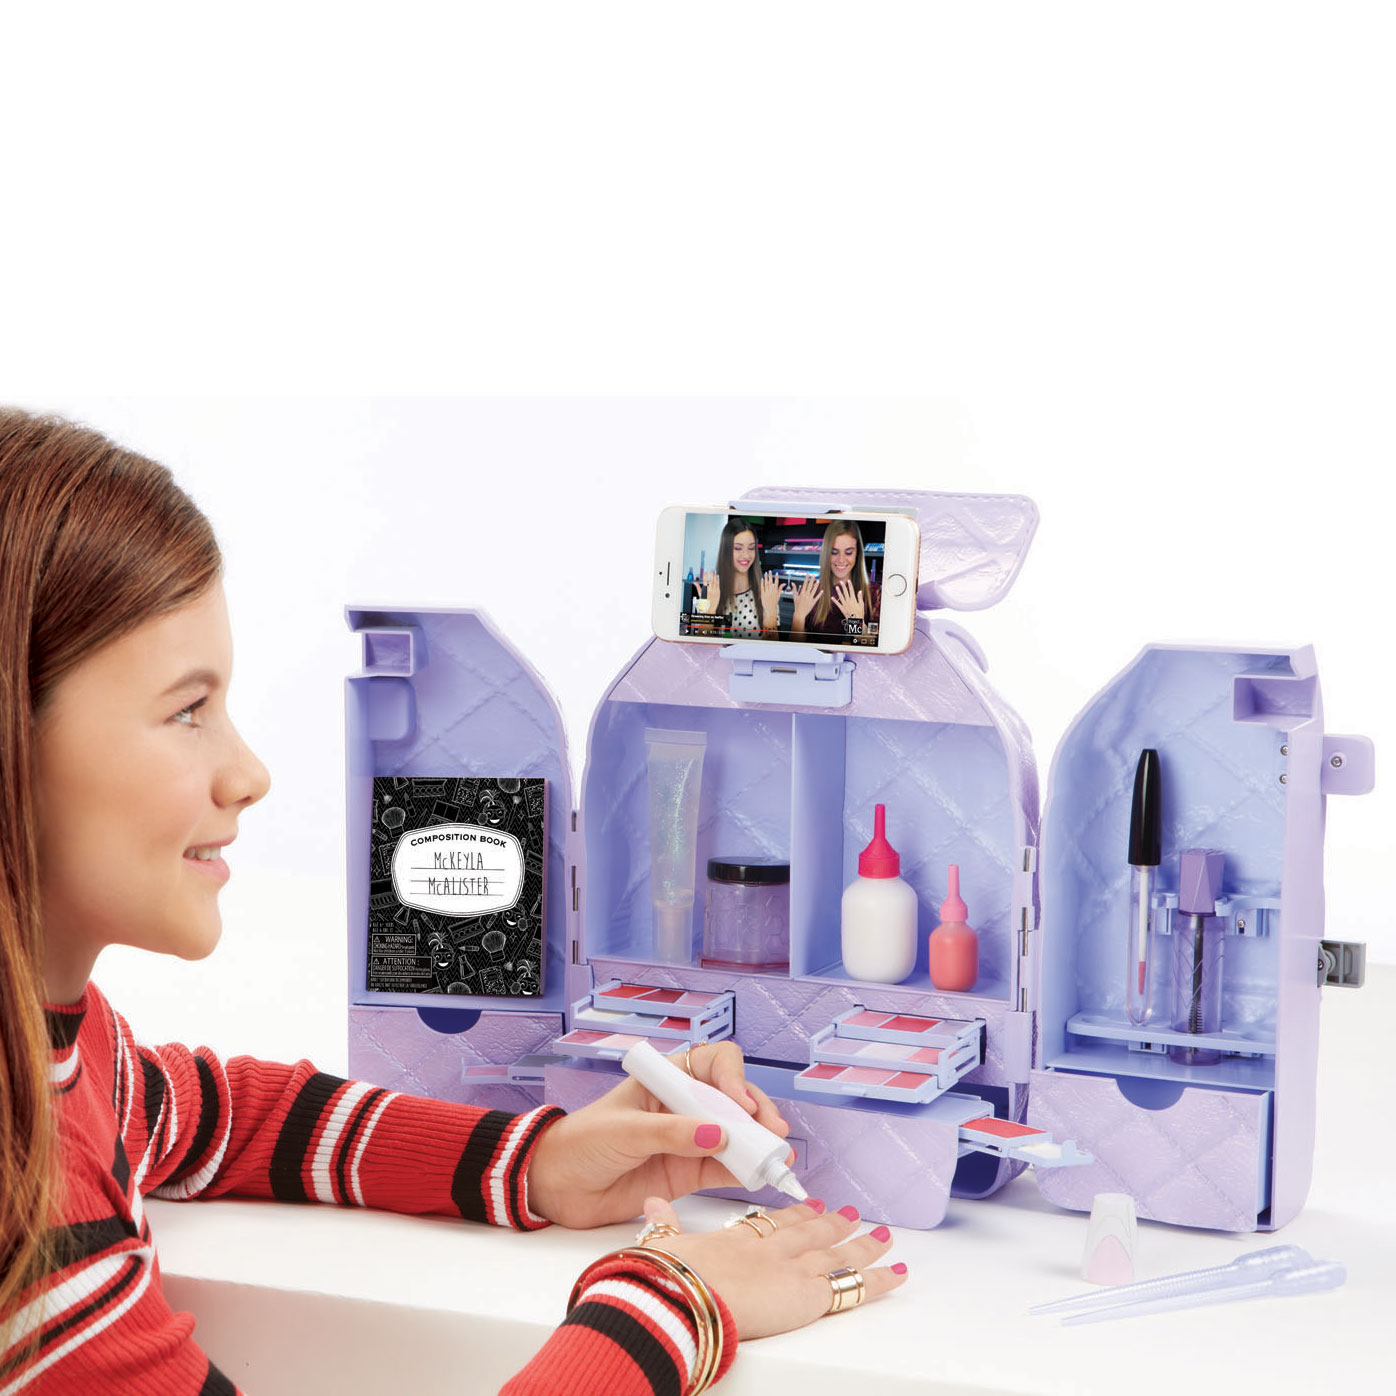 Project Mc2 Ultimate Makeover Rugzak